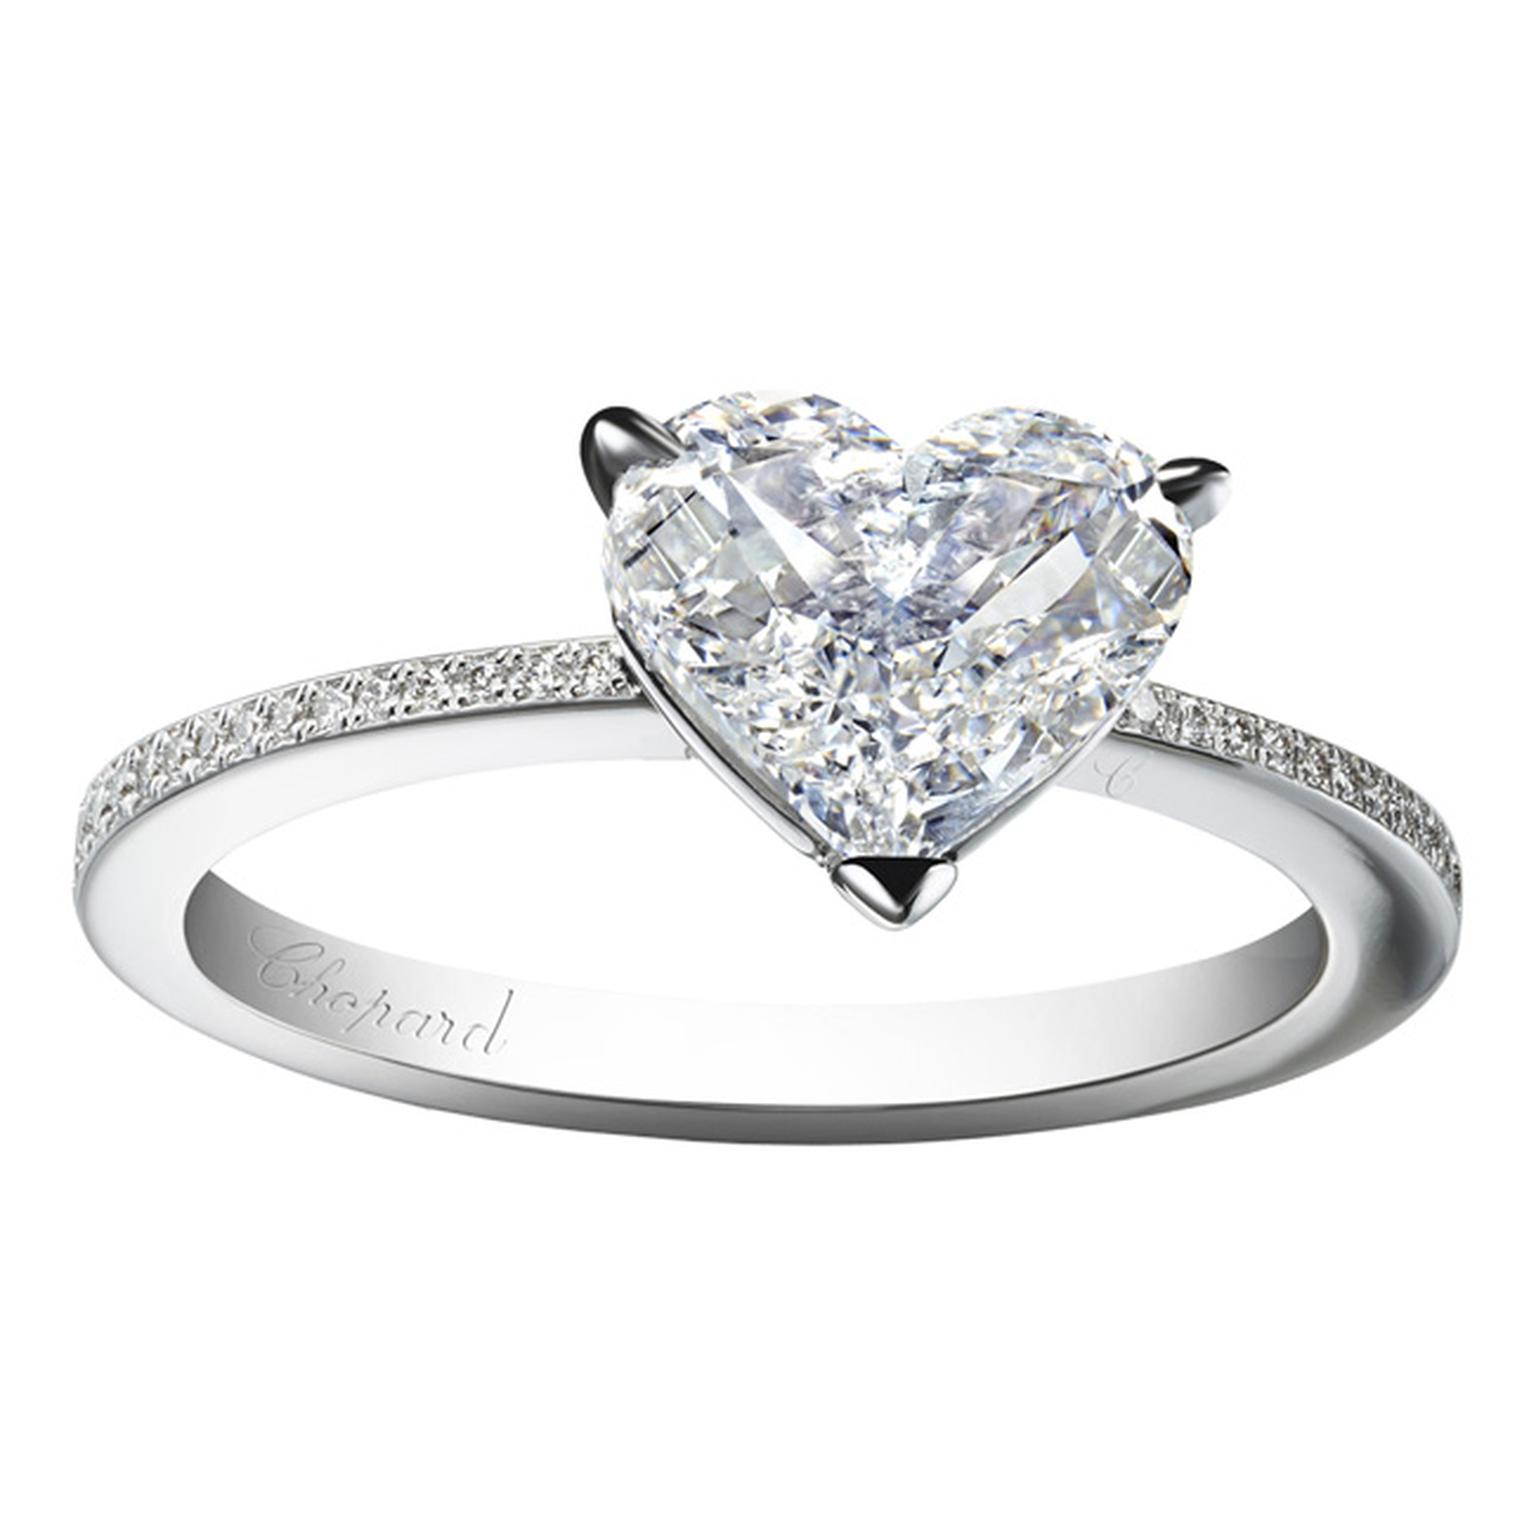 Chopard engagement ring with heart shaped diamond_20131115_Main